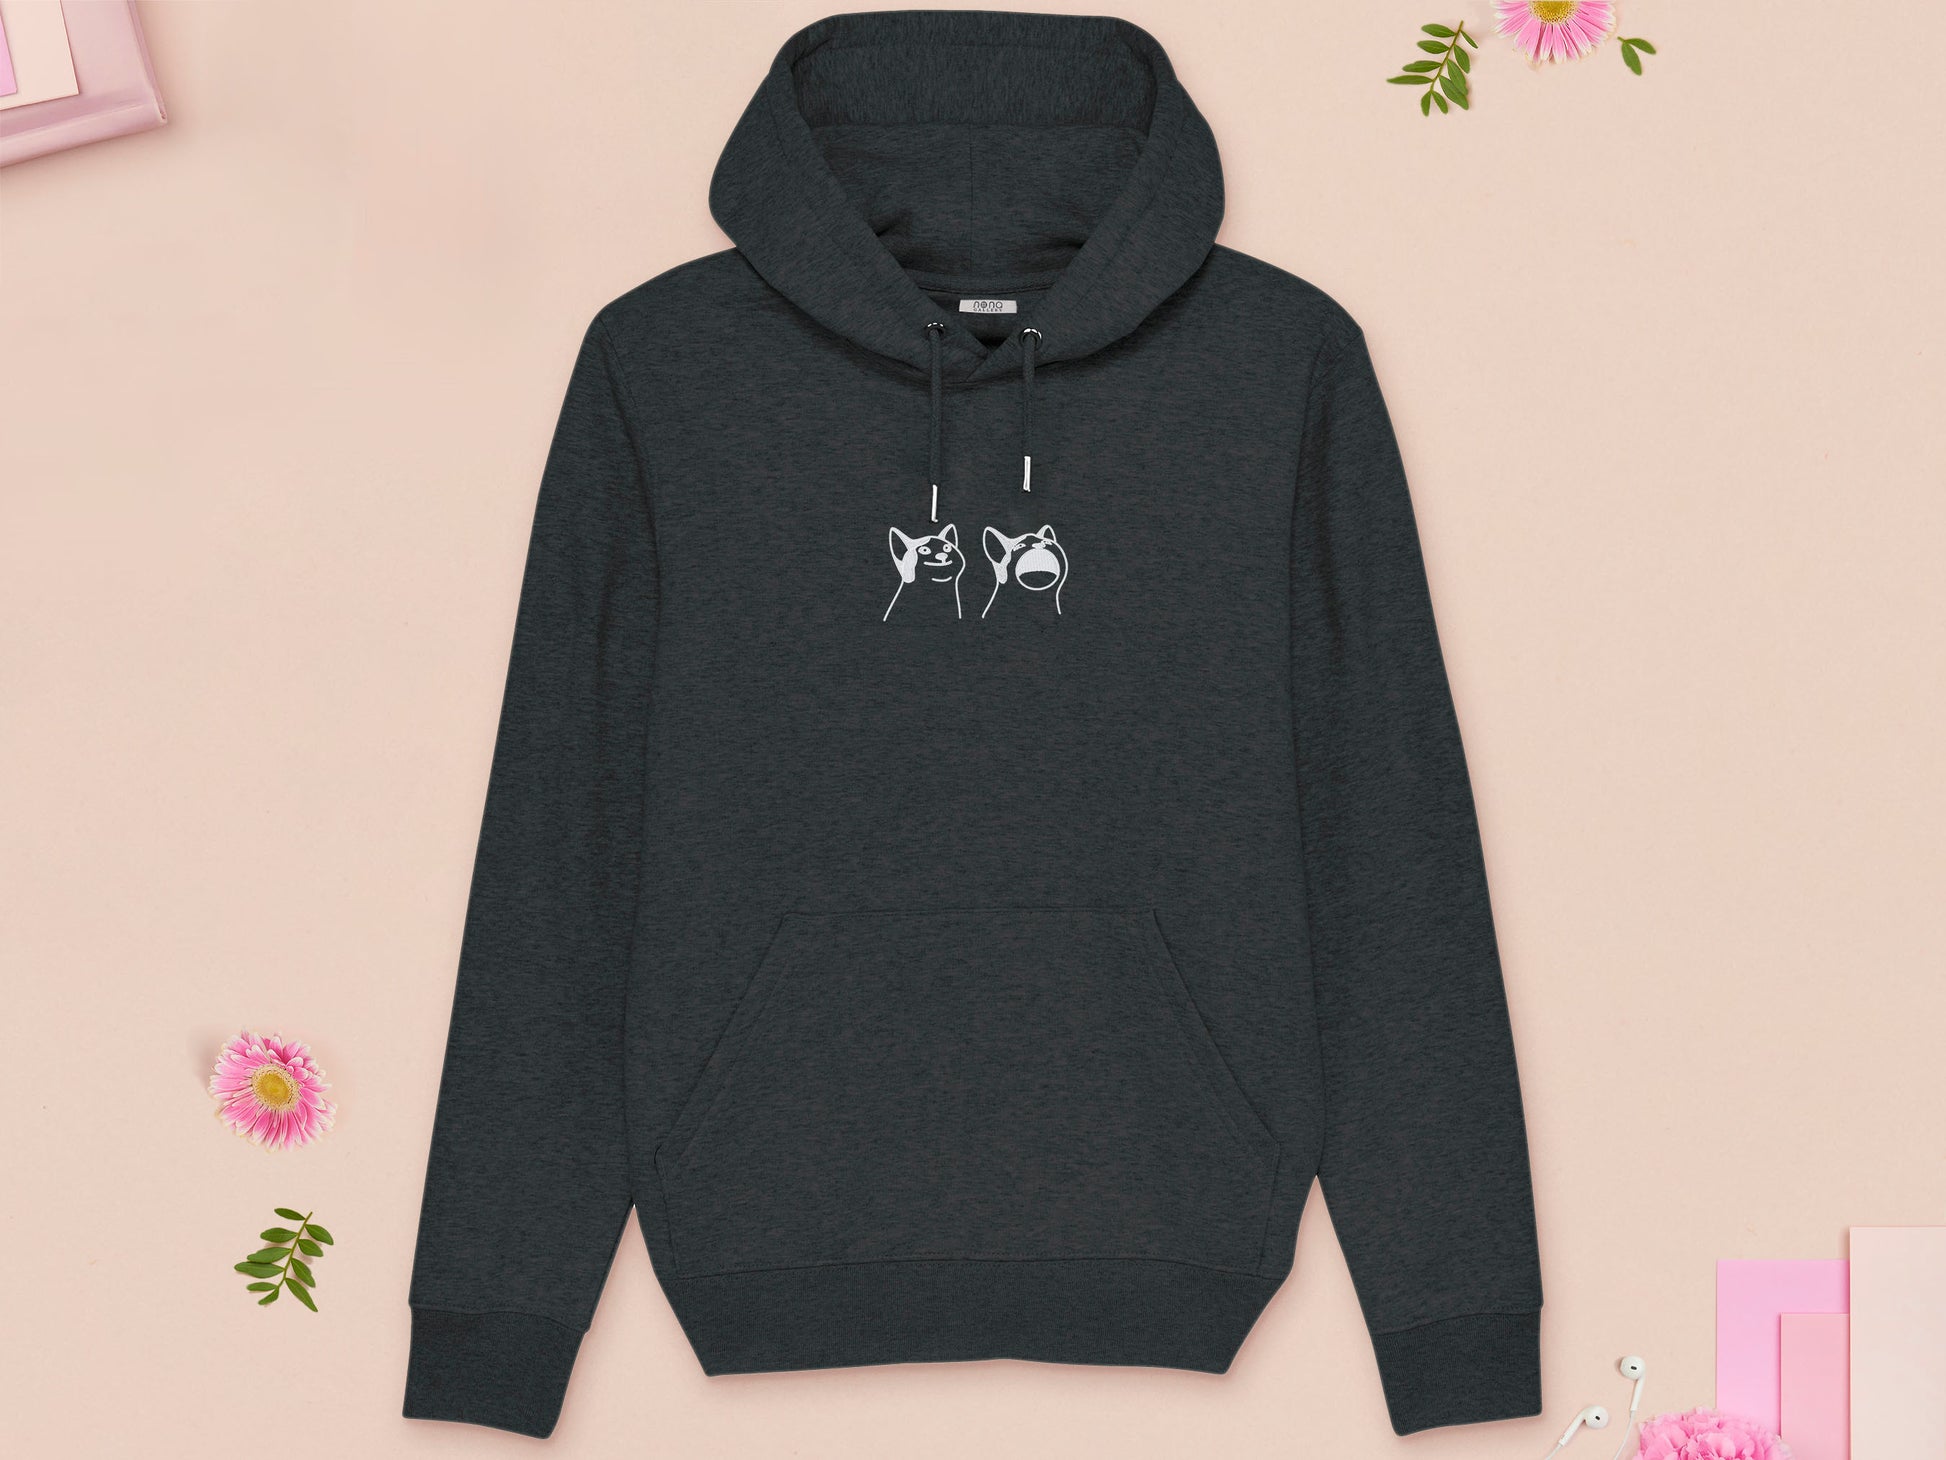 A grey long sleeved fleece hoodie, with an embroidered white thread design of a cute popcat the cat meme reaction twitch emote